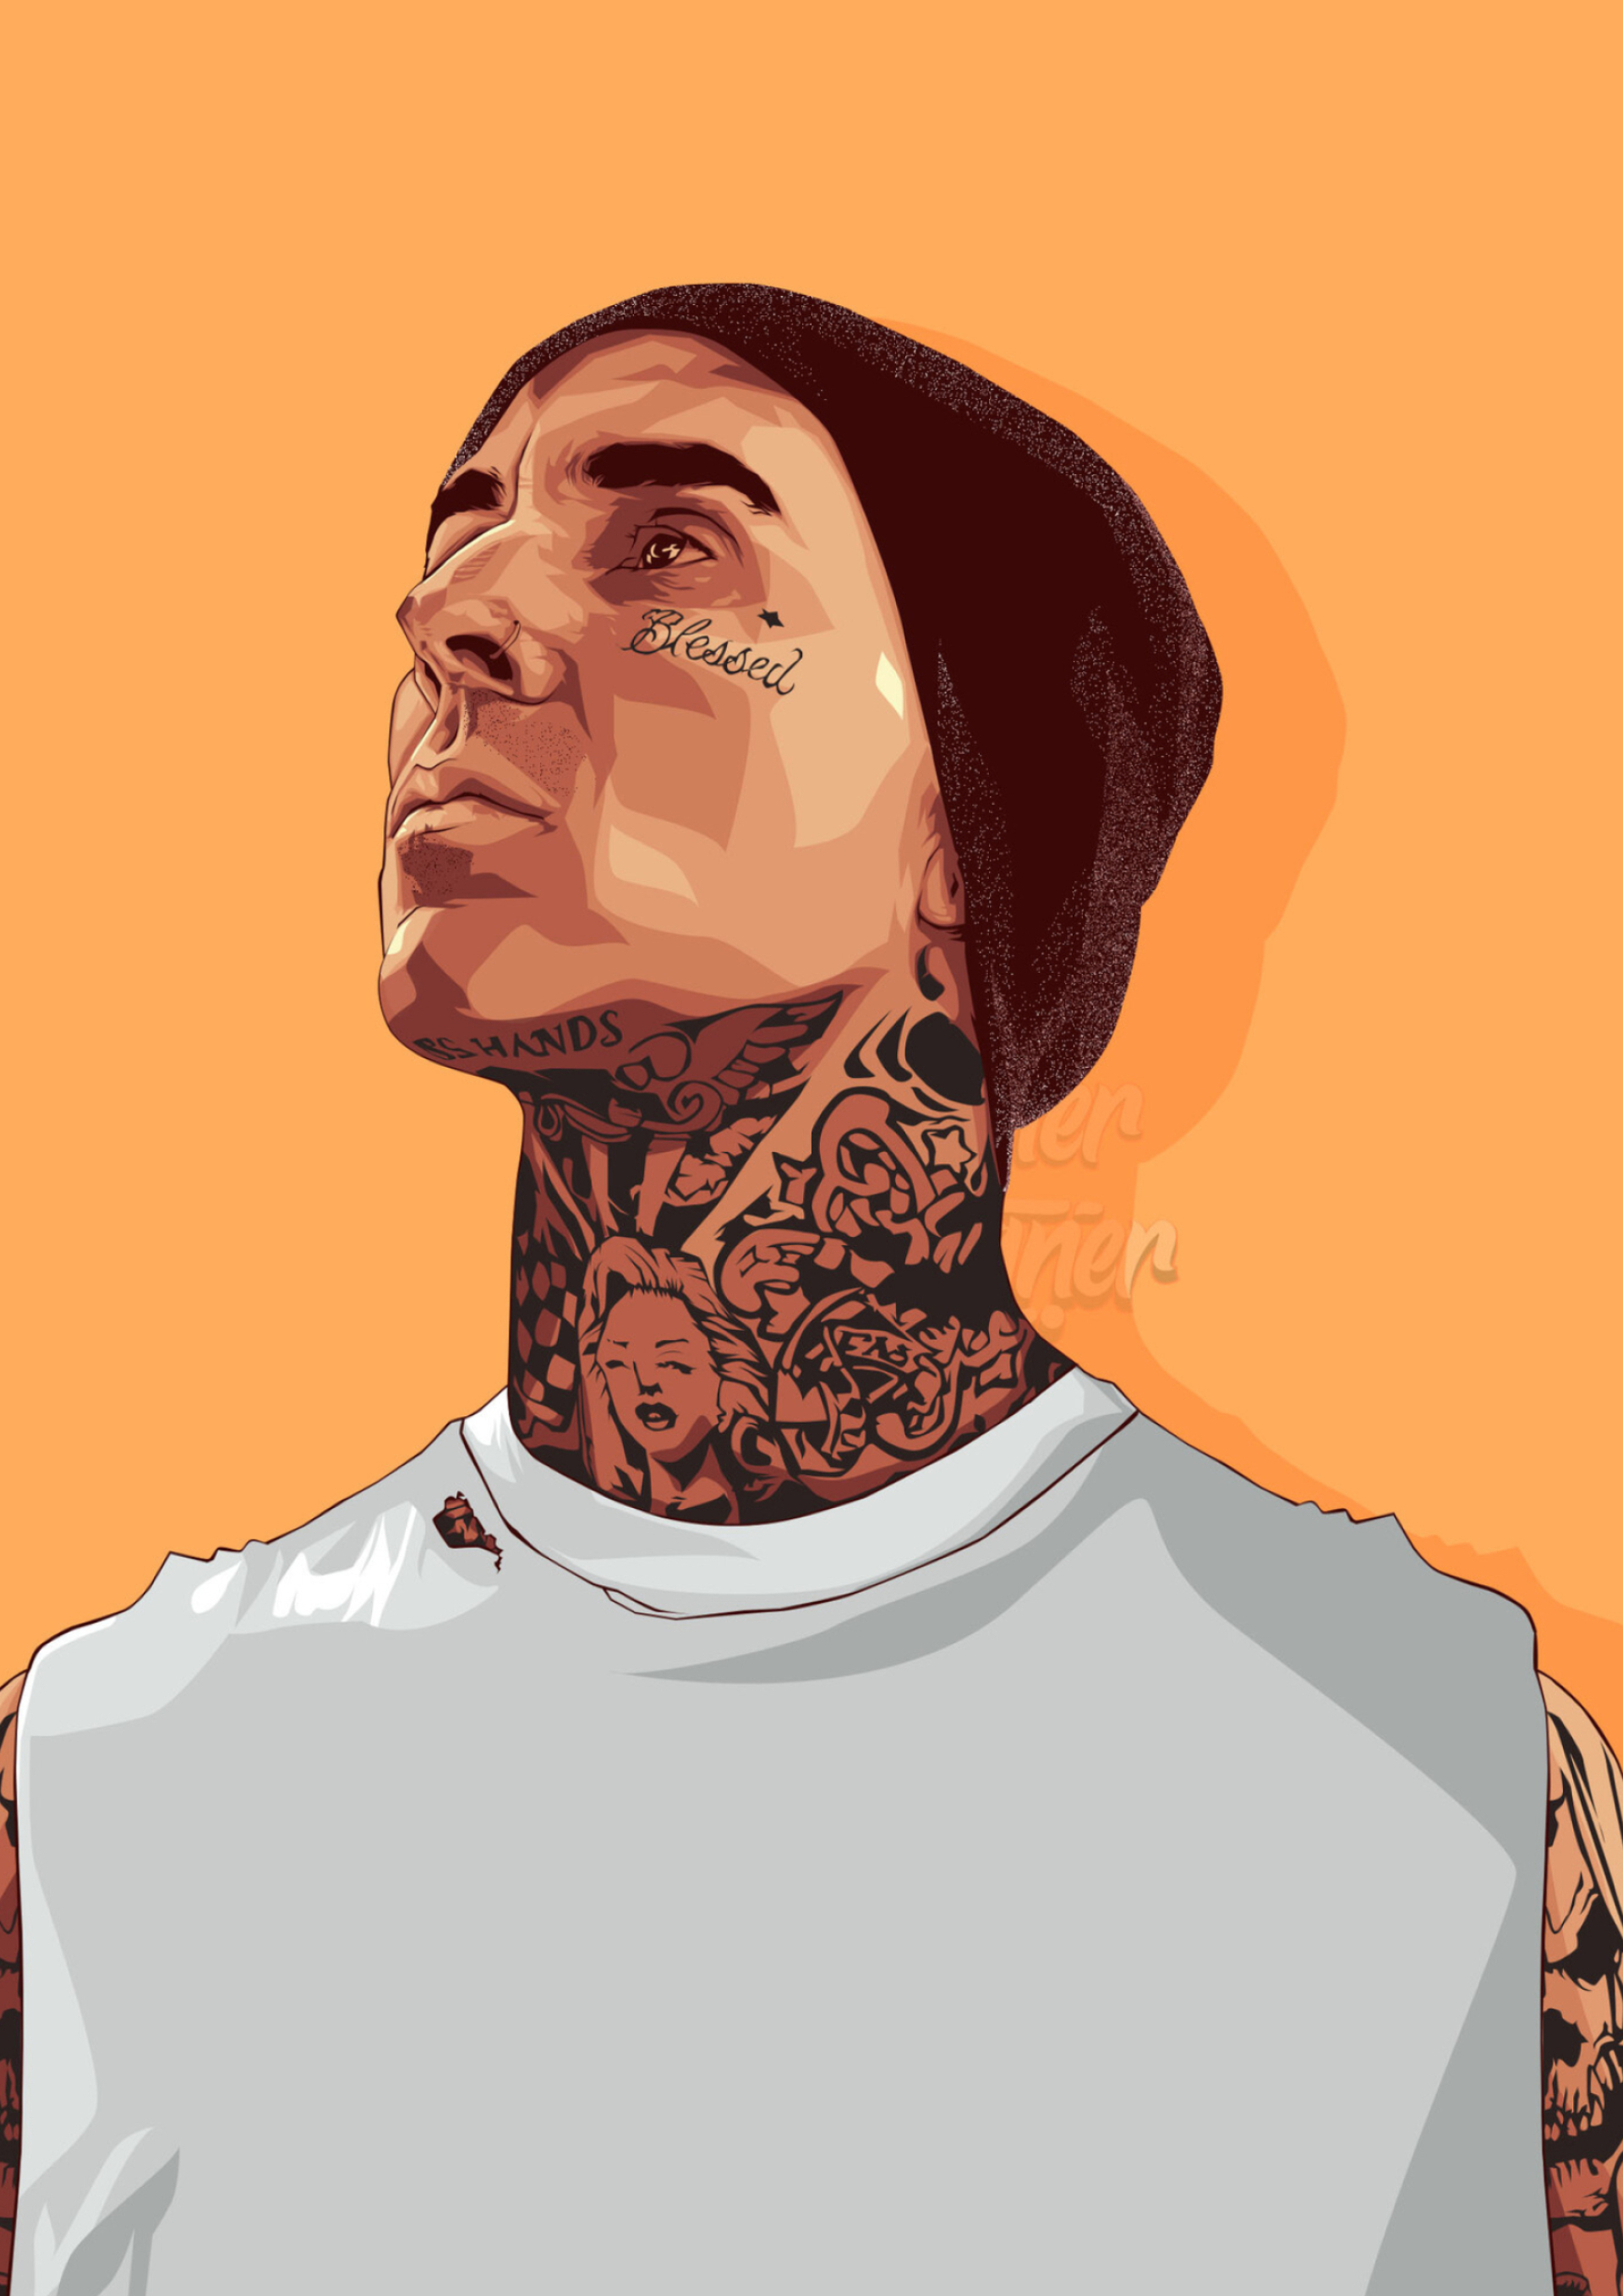 Travis Barker's art on ArtStation, Creative visual expressions, Unique artistic style, Showcasing his talents, 1920x2720 HD Phone